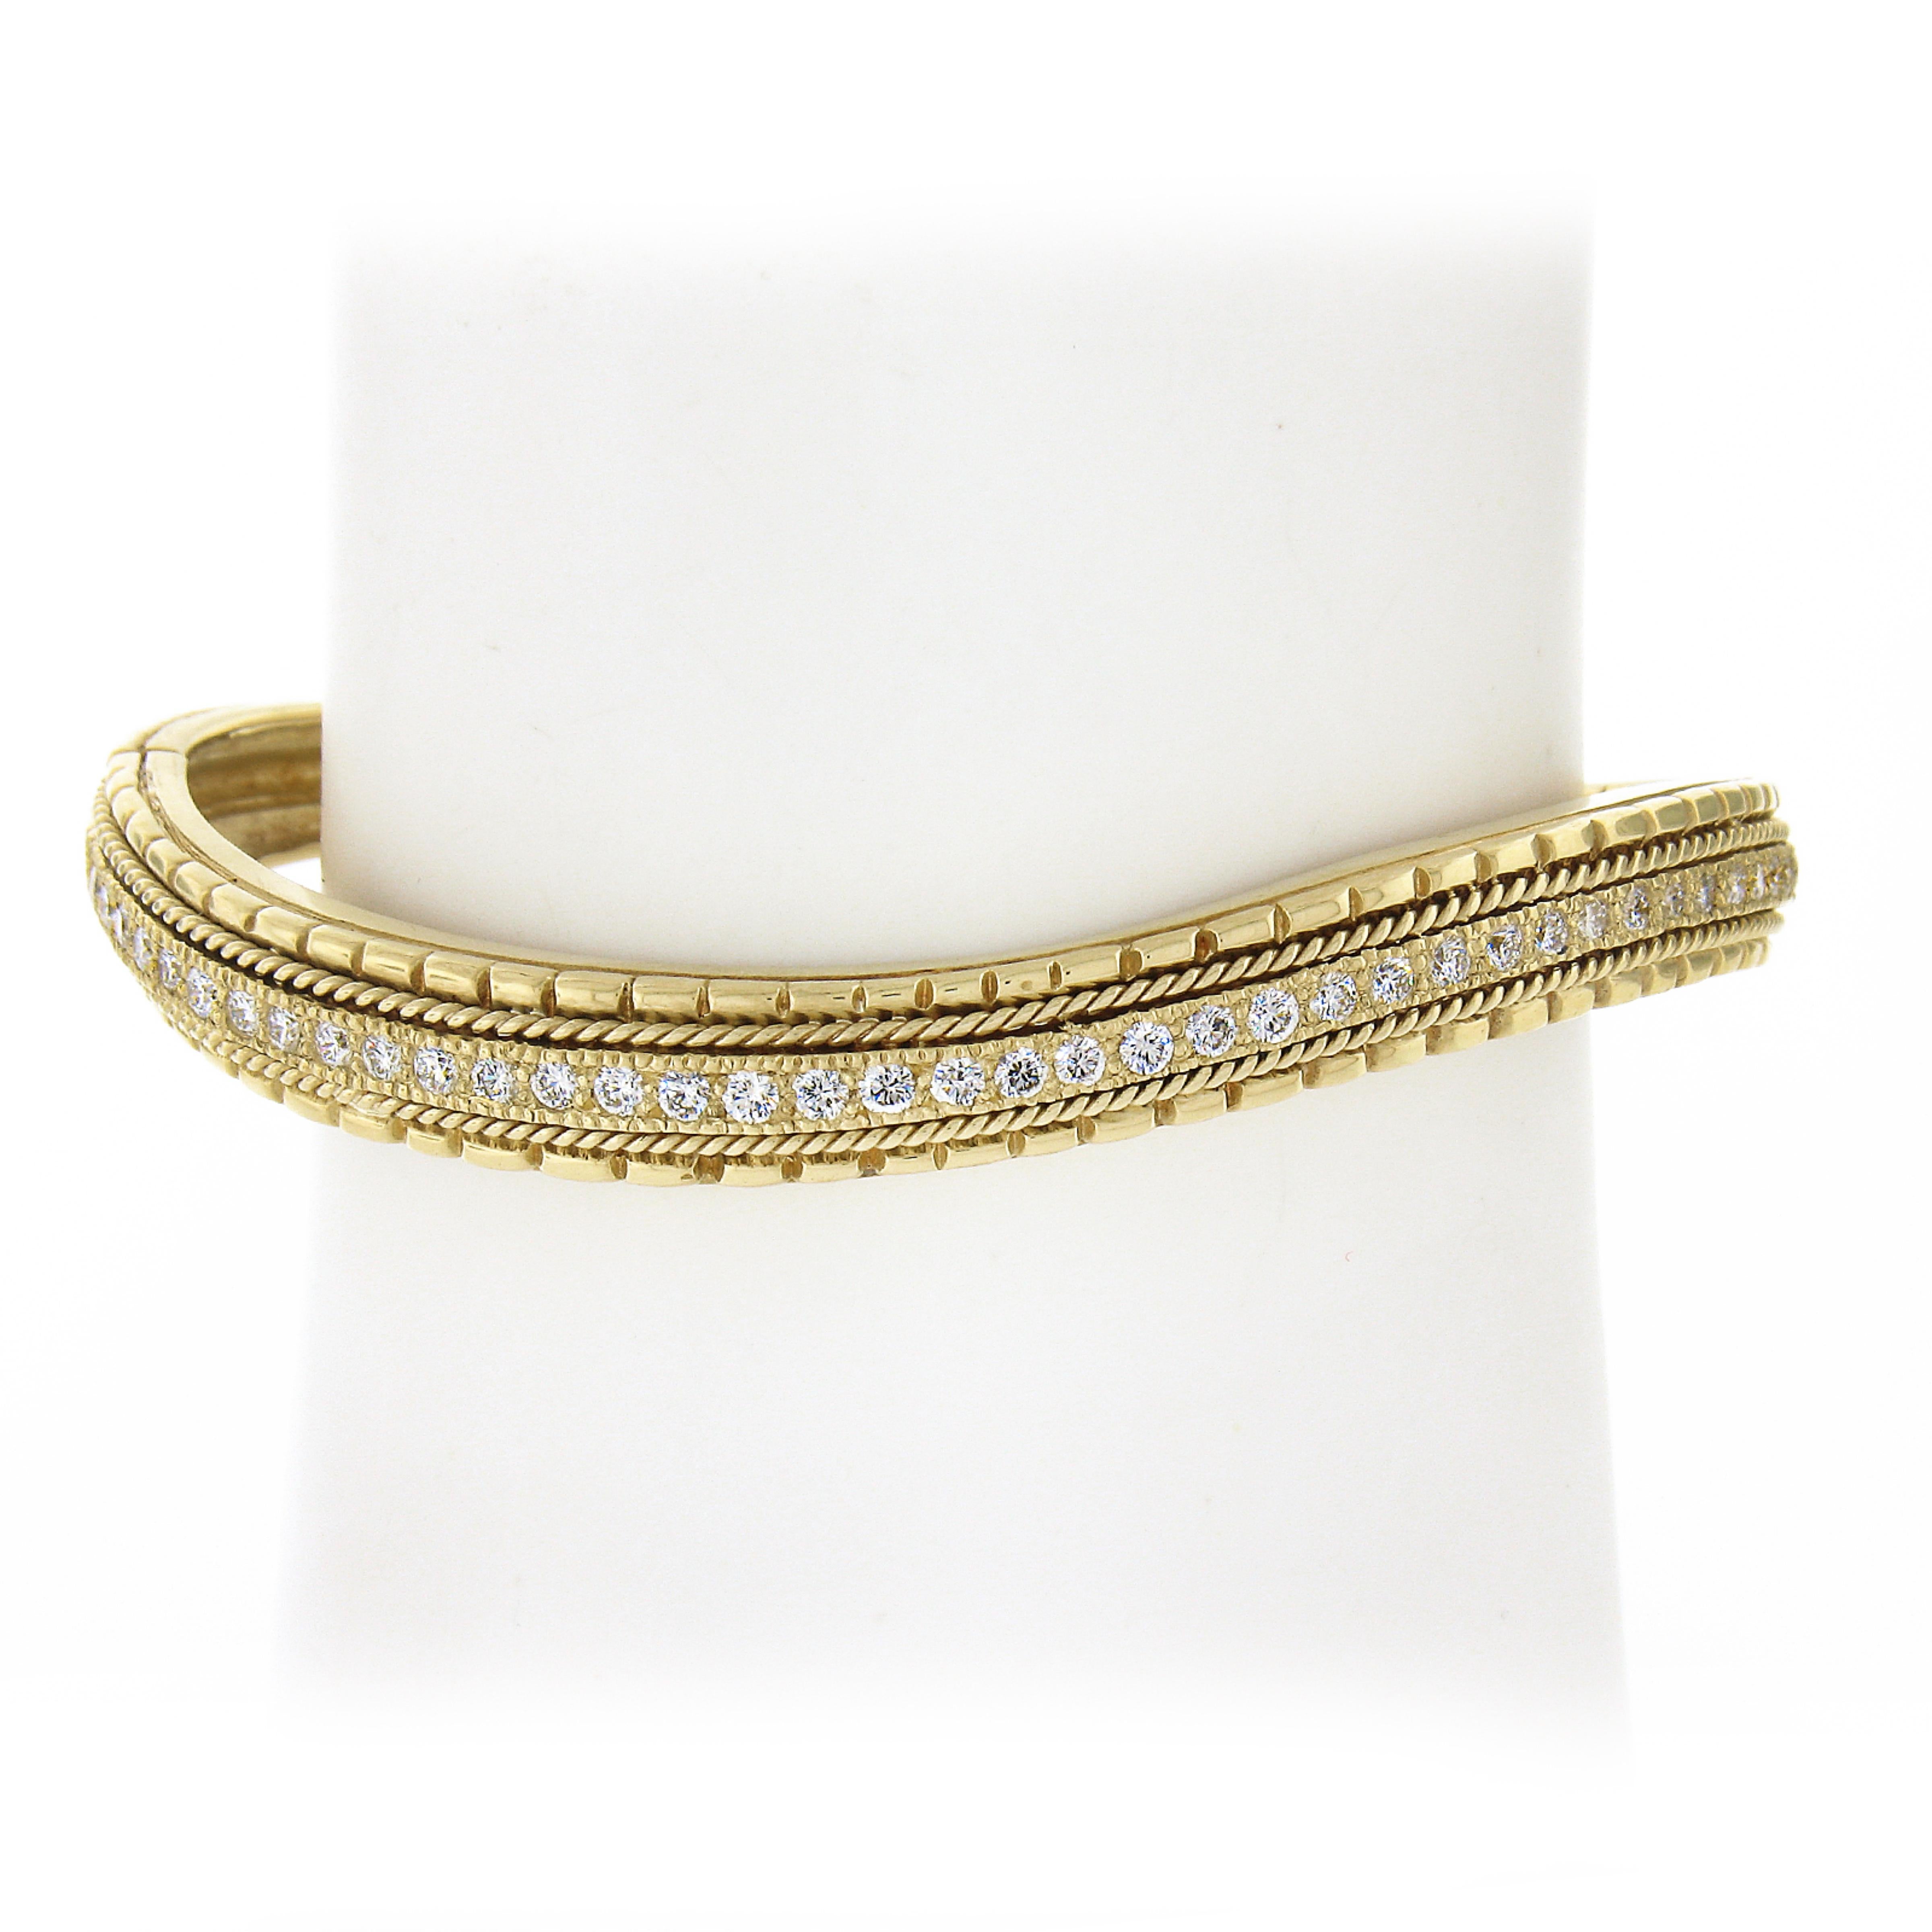 This amazing wavy bangle bracelet is crafted in solid 18k yellow gold, featuring 40 round brilliant cut top quality diamonds throughout its center. Each of the fiery diamonds is perfectly pave set totaling 1.14 carats in weight. The sides are framed